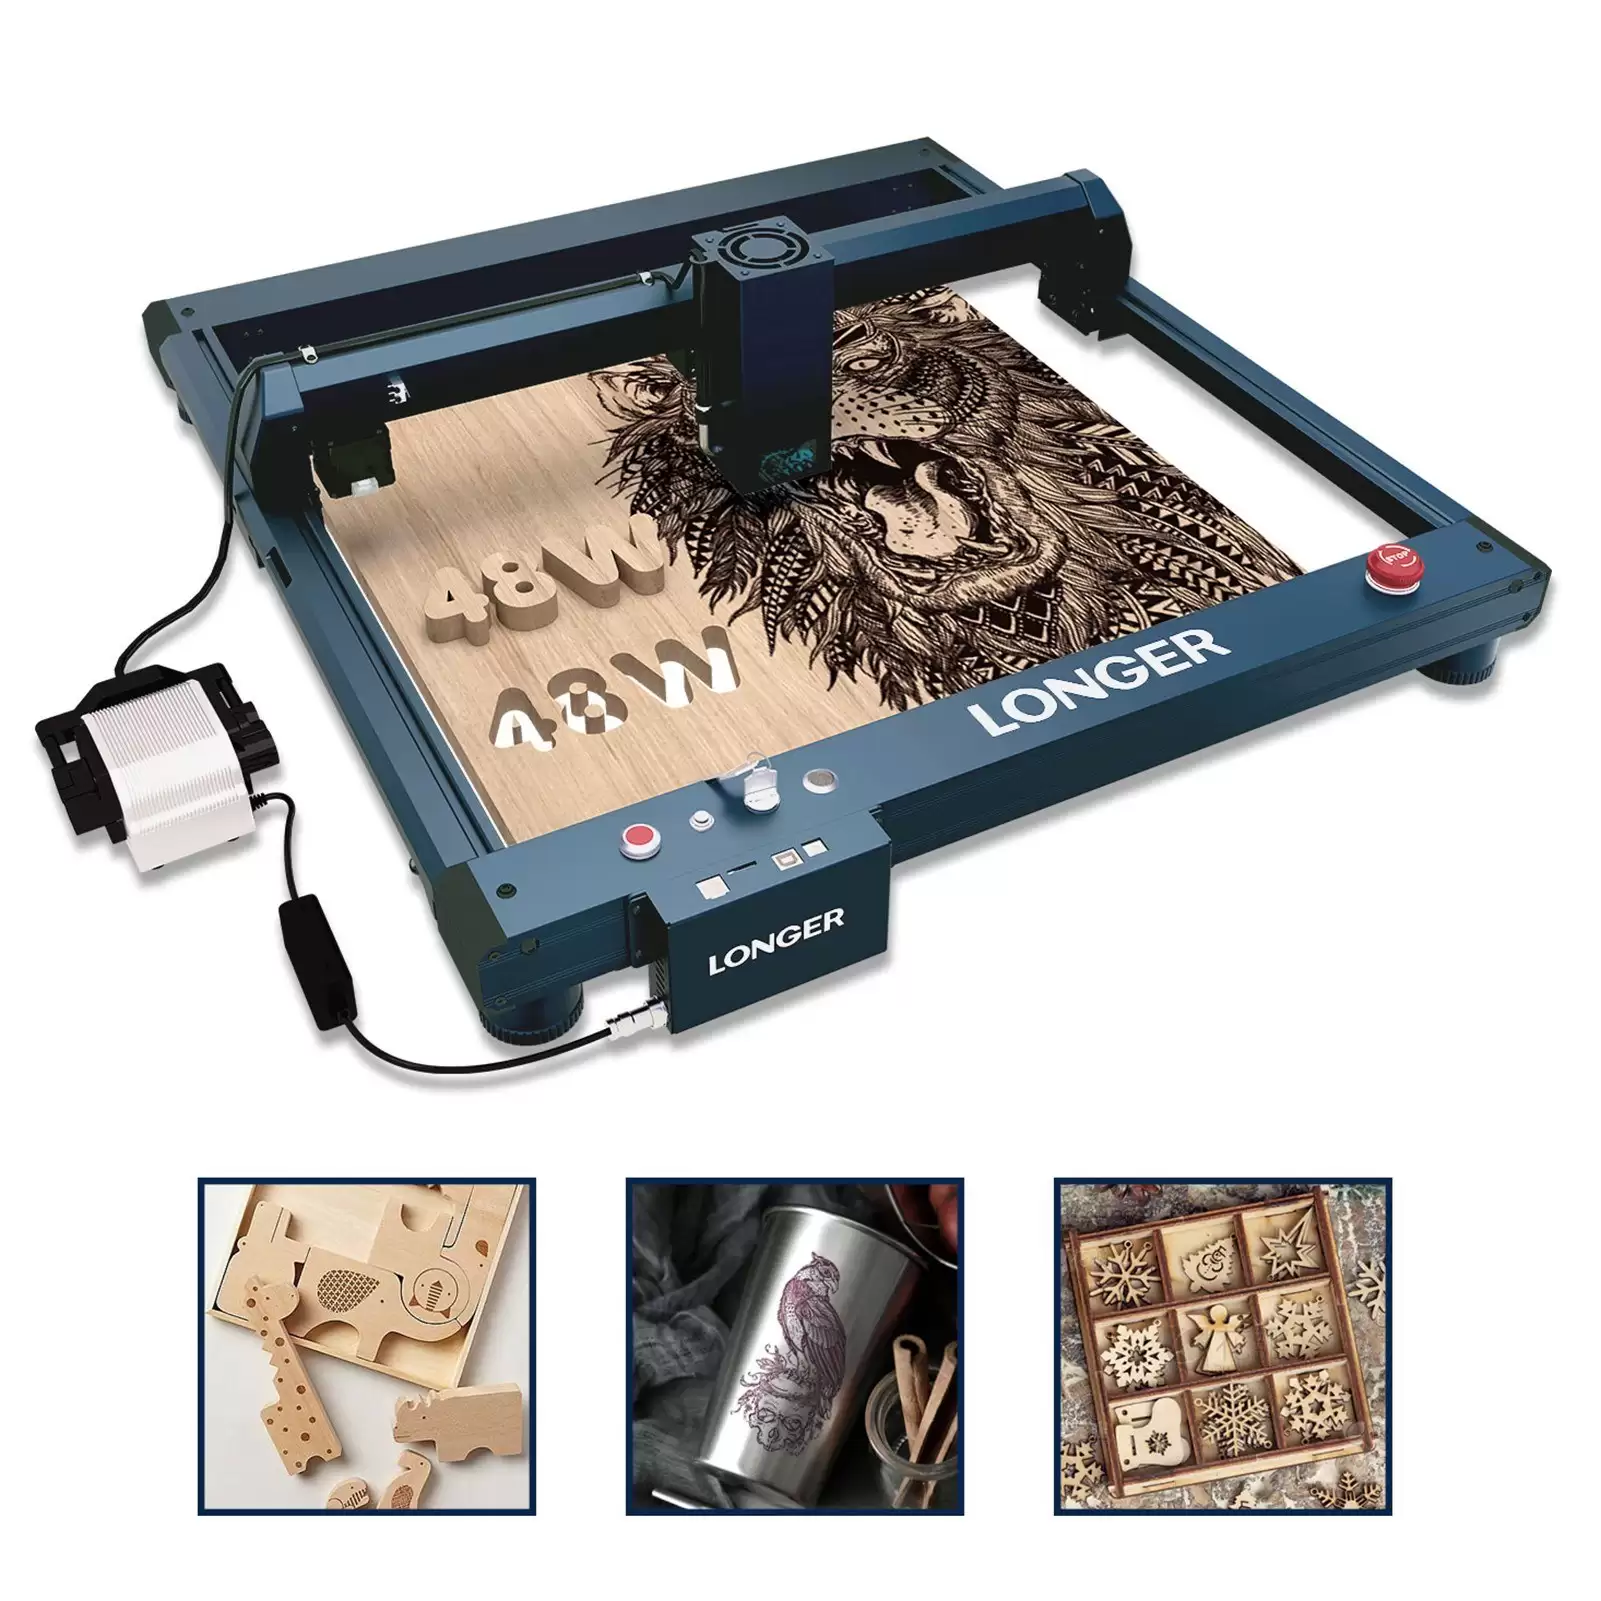 Order In Just €879 Longer Laser B1 40w Laser Engraver With Smart Air Assist System With This Discount Coupon At Tomtop